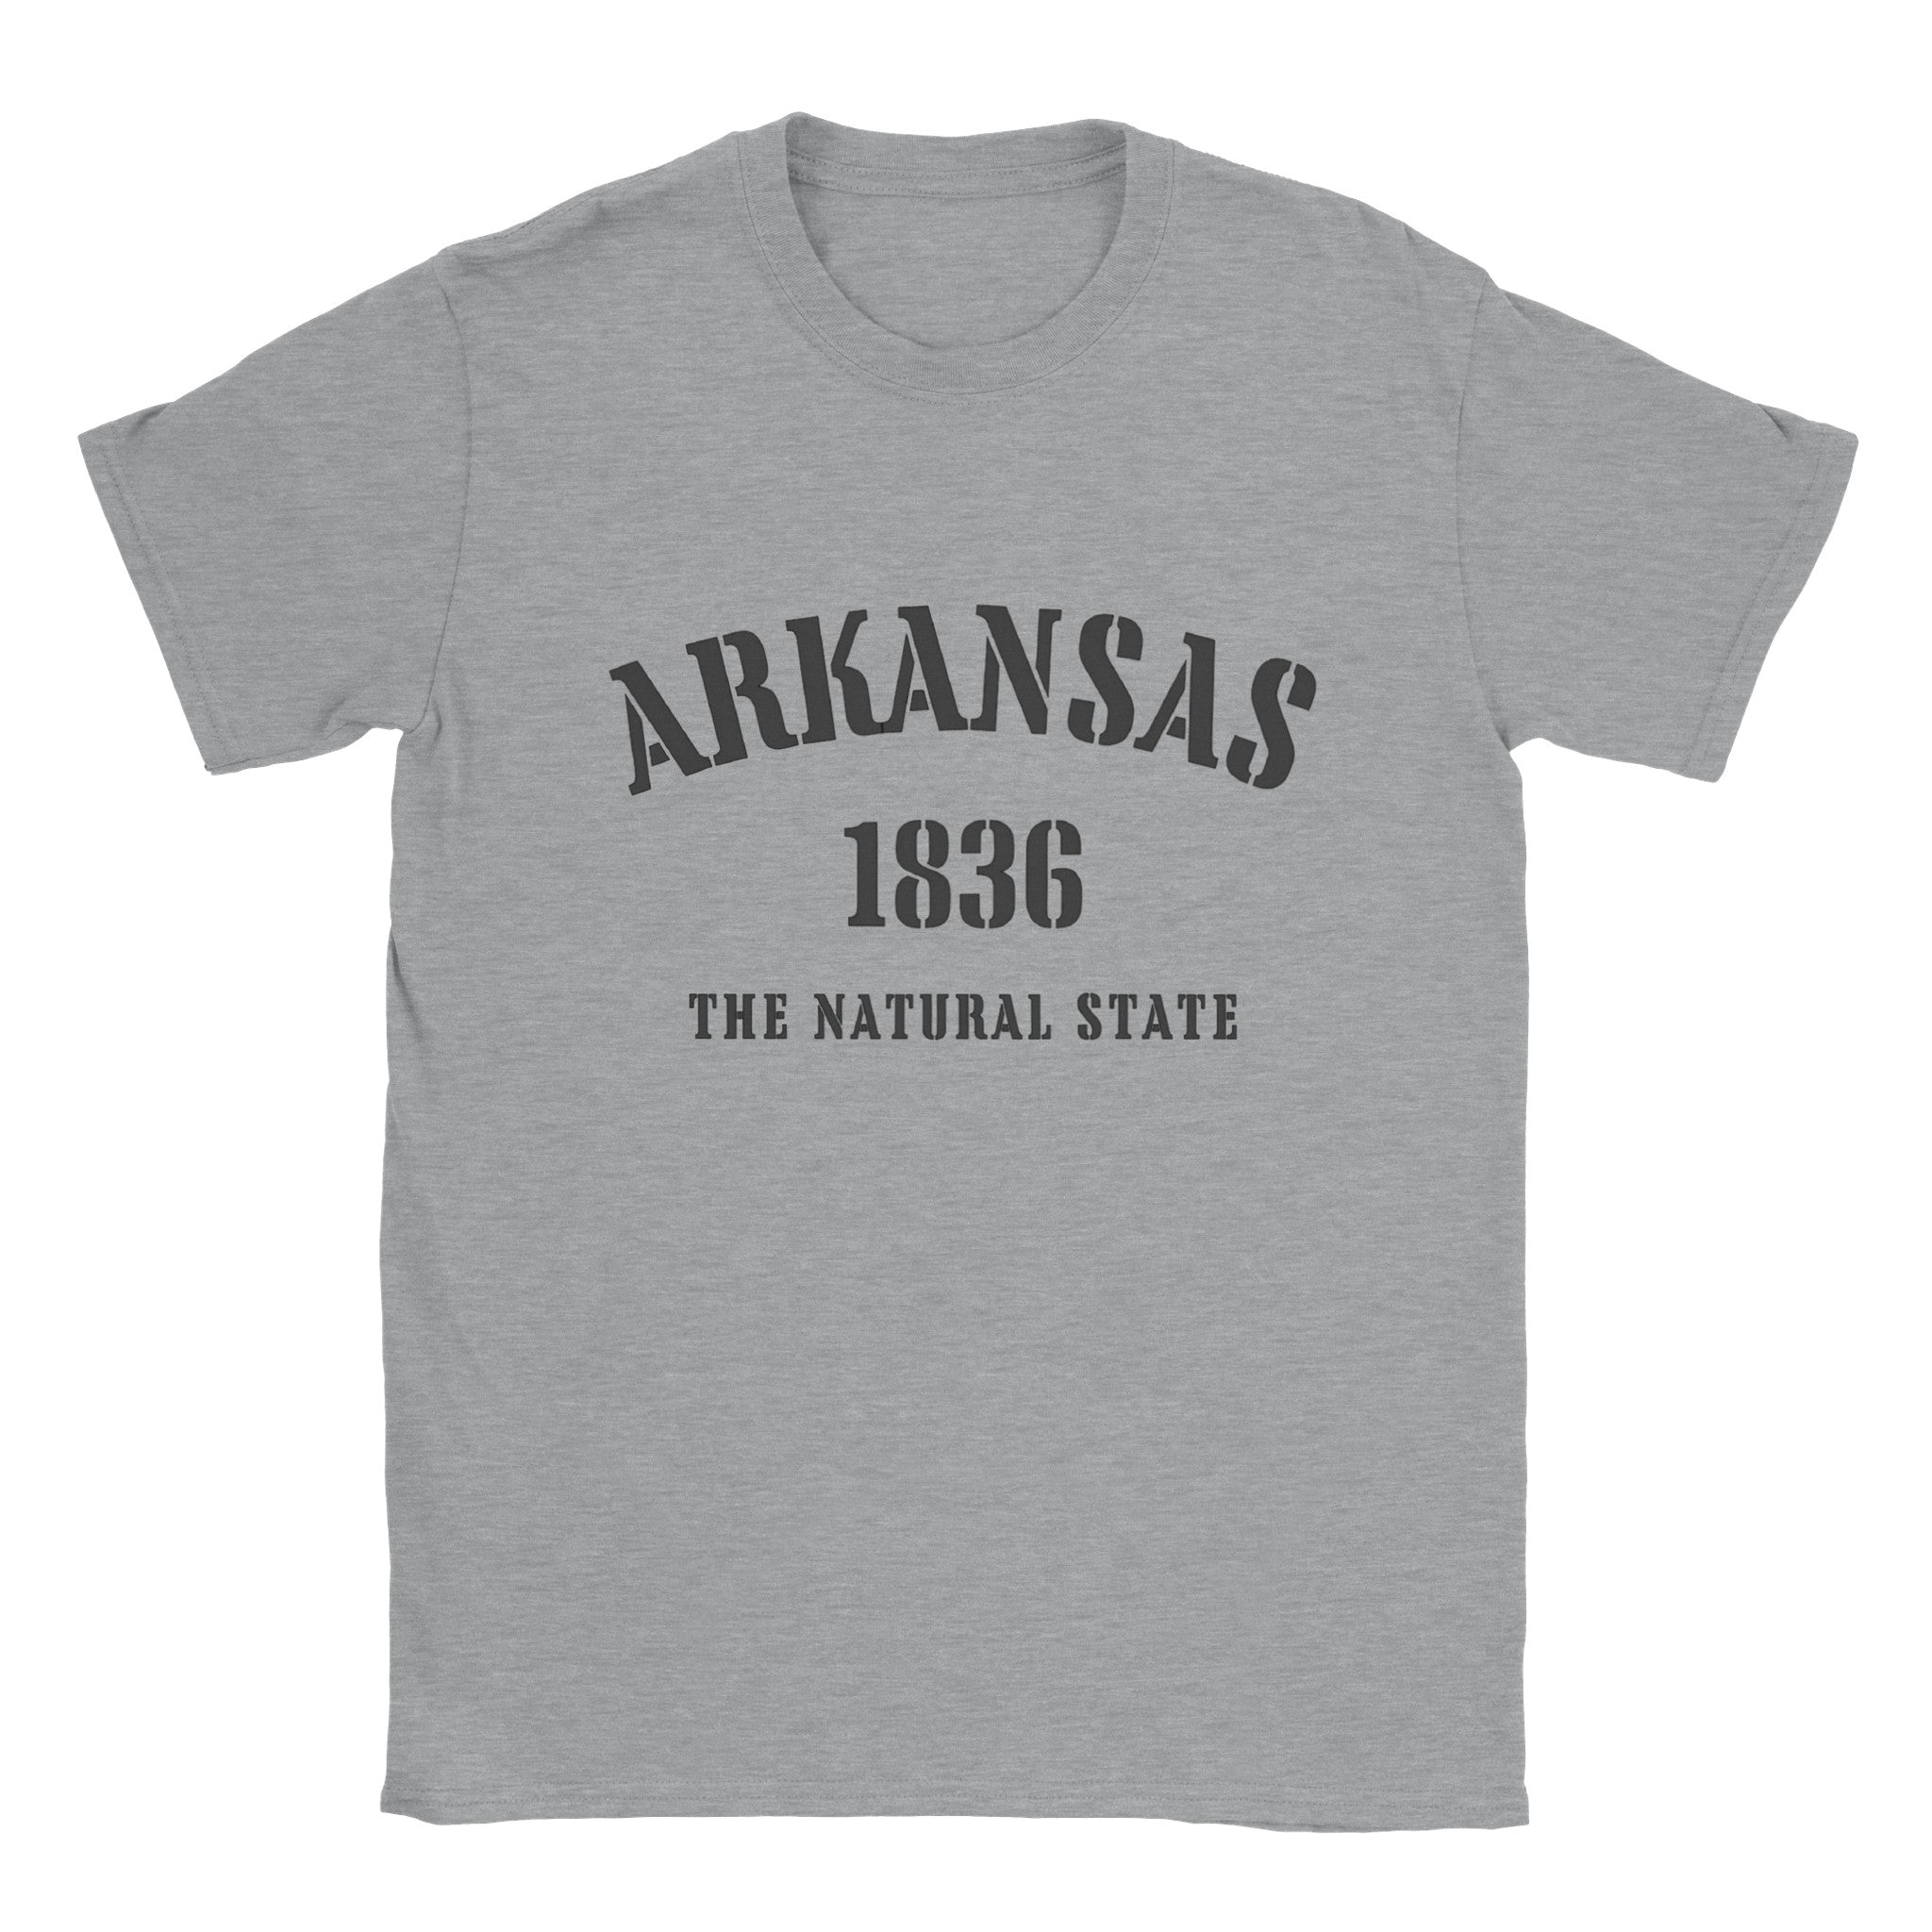 Arkansas- Classic Unisex Crewneck States T-shirt - Creations by Chris and Carlos